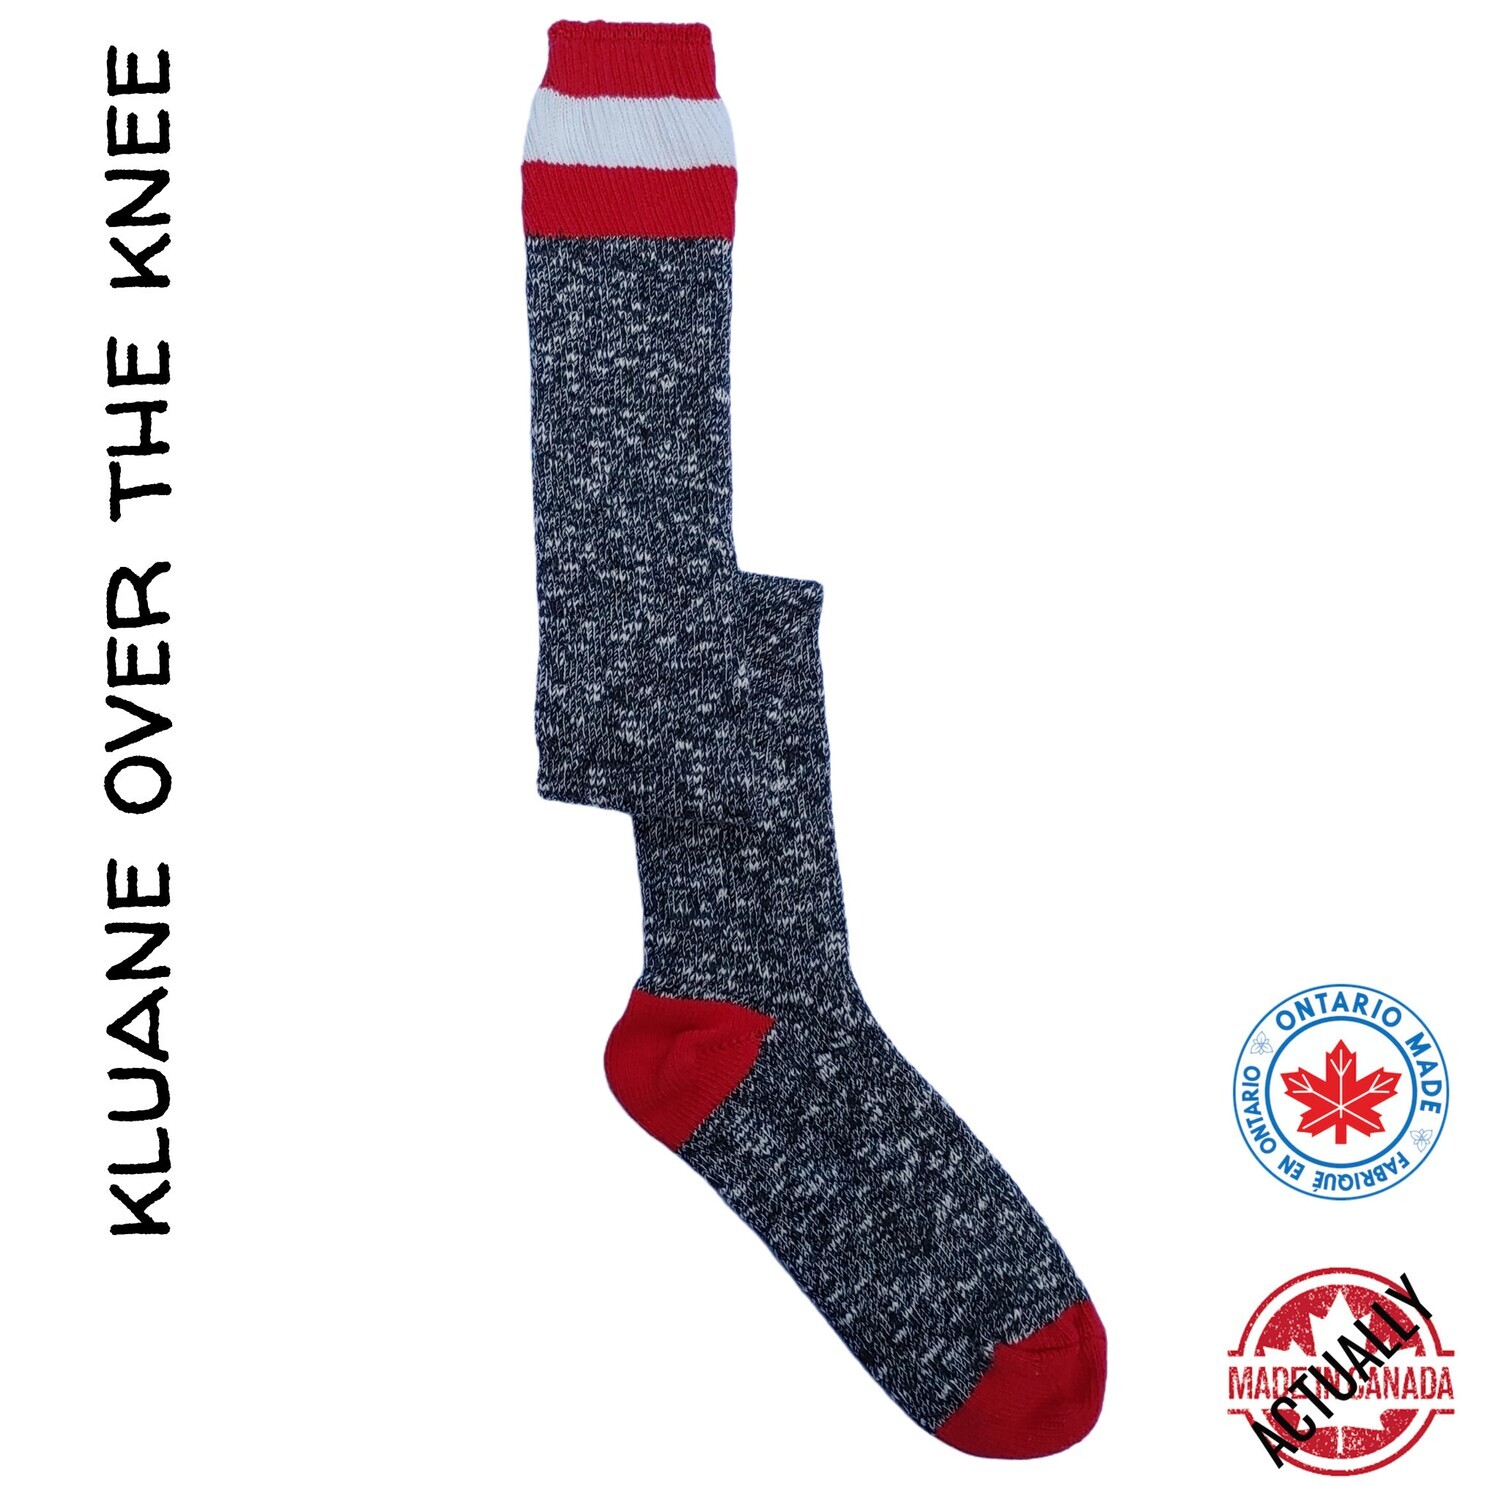 Kluane Cotton Over the Knee Sock - Red